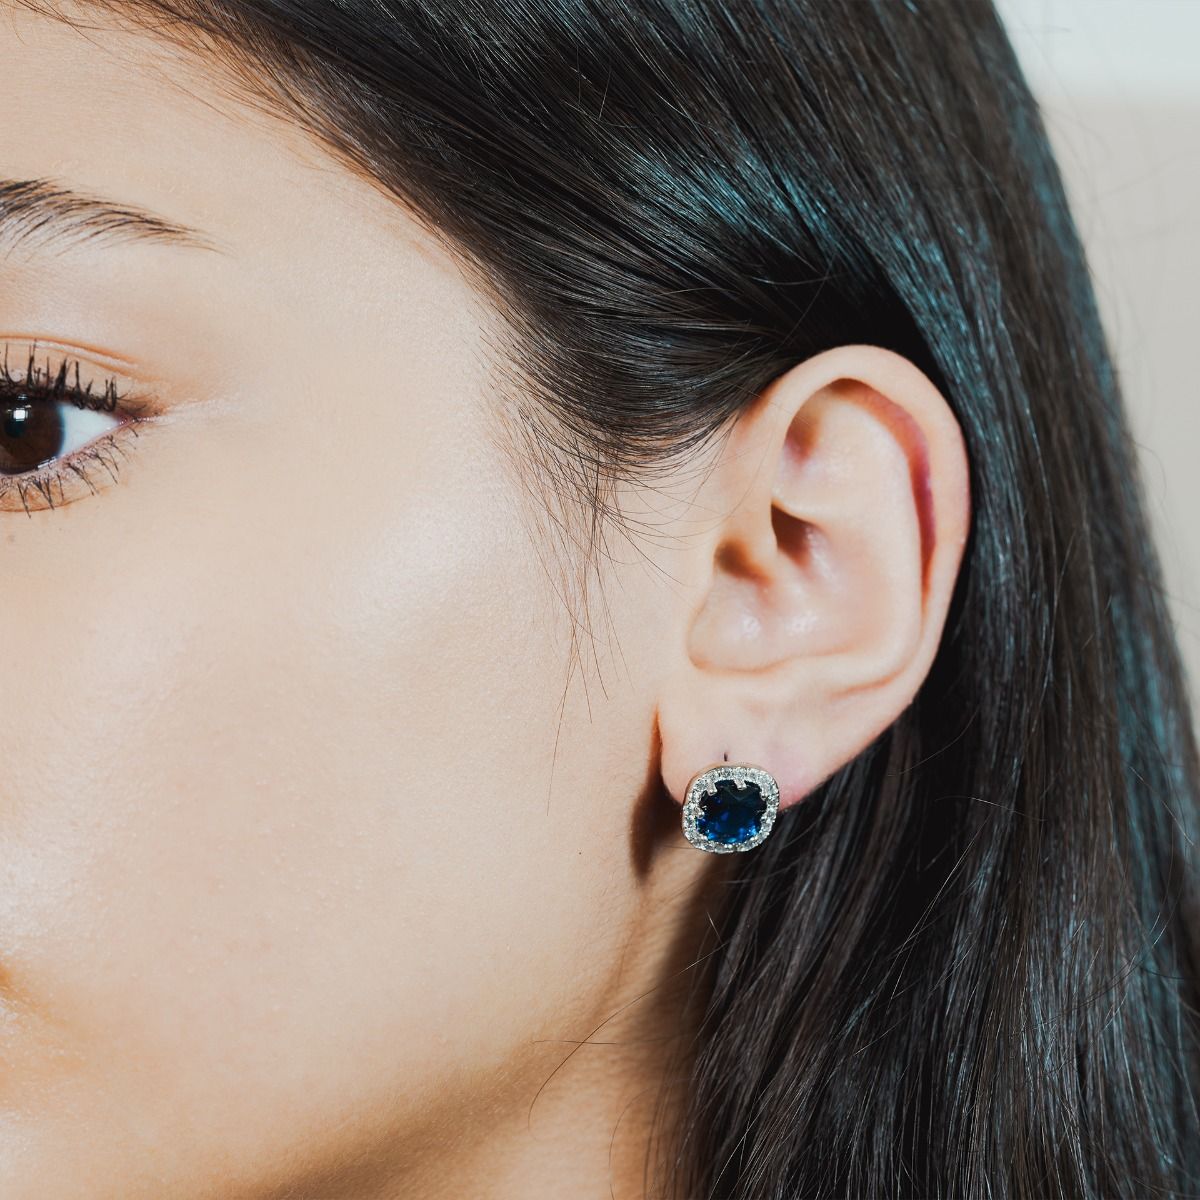 These striking stud drop earrings are set with flawlessly cut cubic zirconia stones, surrounding a dazzling Sapphire coloured cushion cut centre stone. Wear to add timeless glamour to any look.